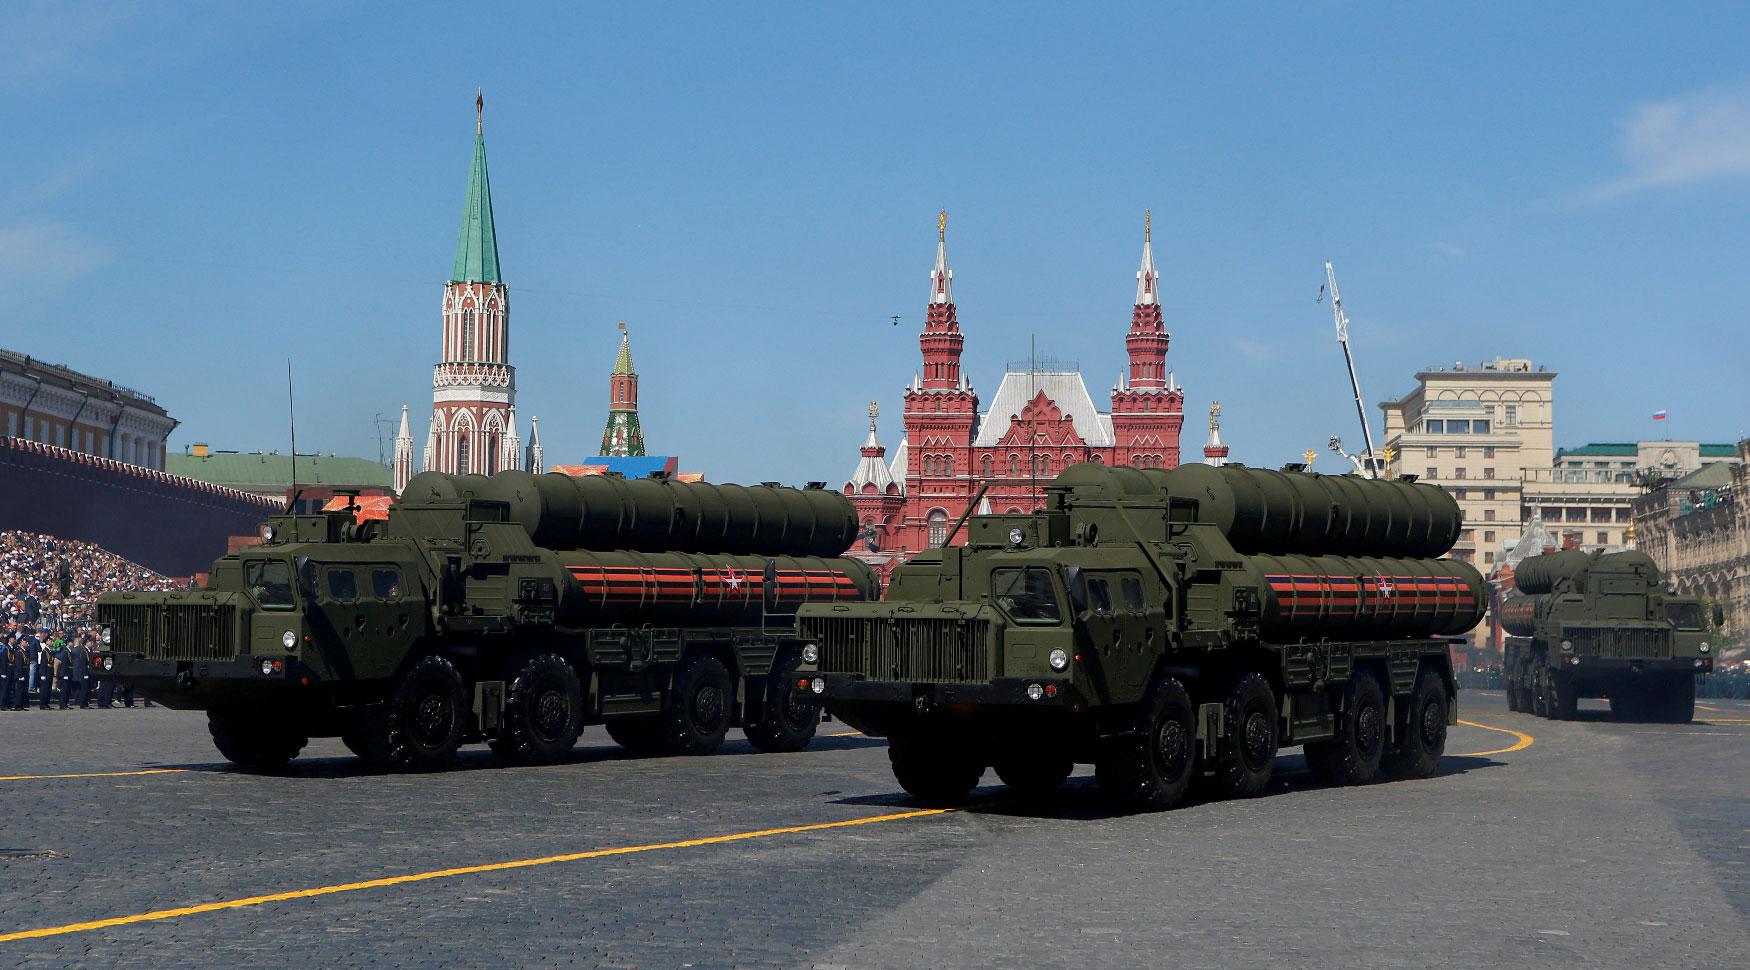 Russian S-400 missile air defence systems on display during a parade marking the 73rd anniversary of the victory over Nazi Germany in World War Two, at Red Square in Moscow, May 9, 2018.